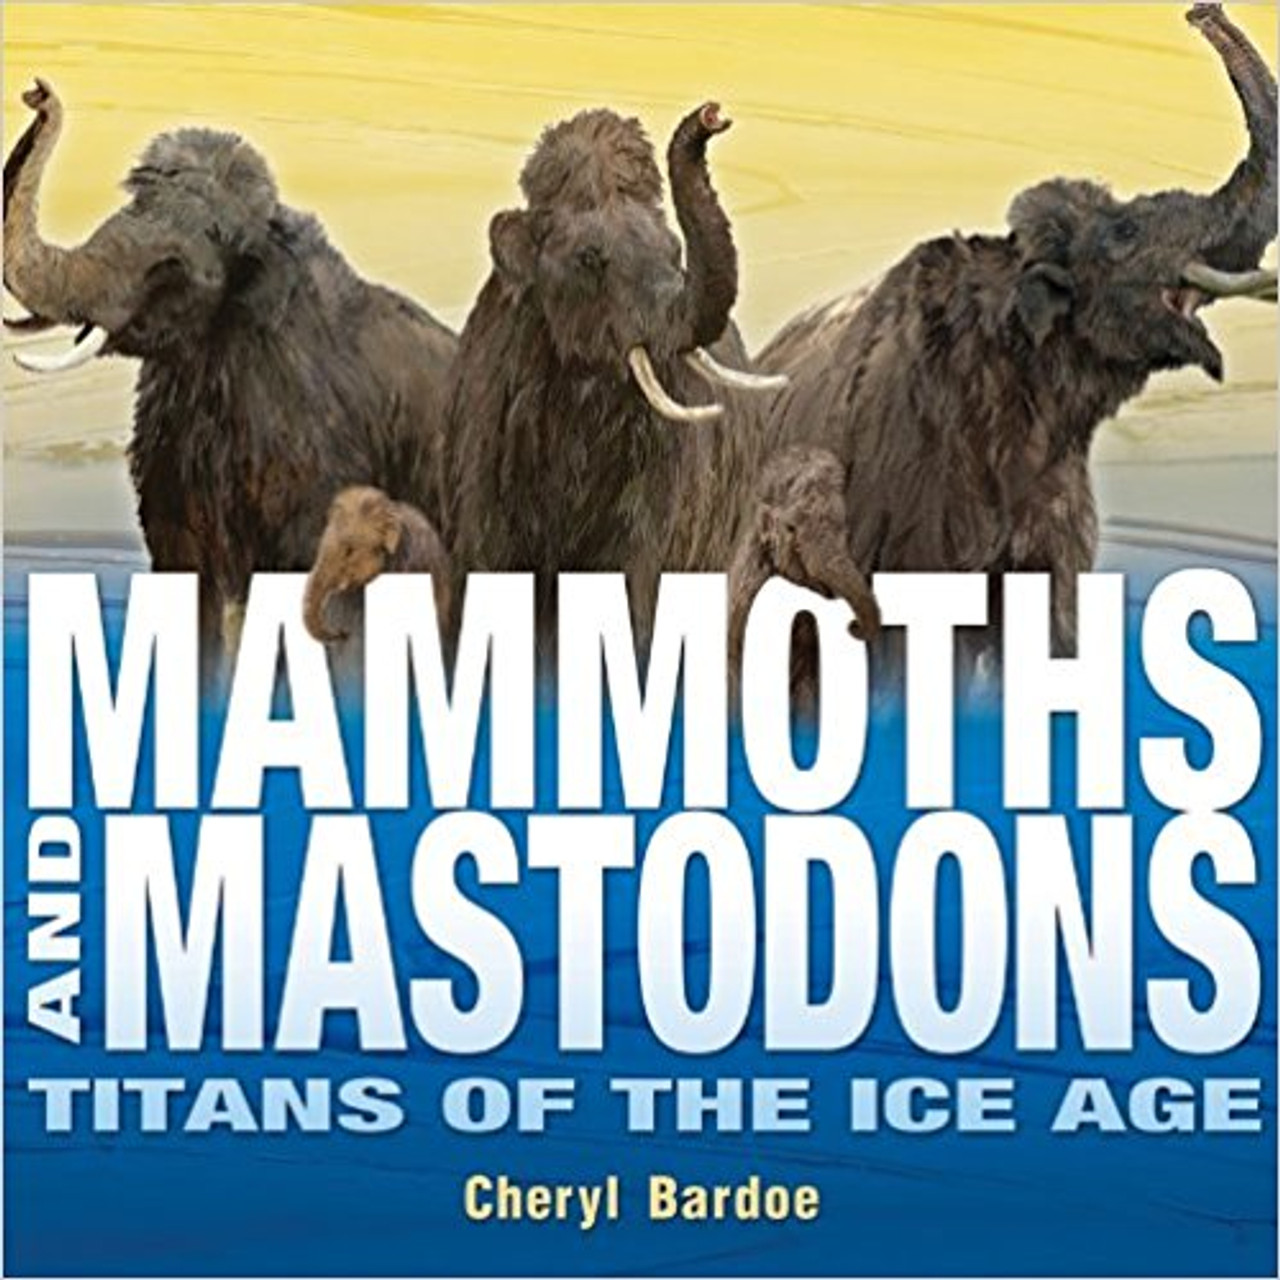 Mammoths and Mastadons: Titans of the Ice Age (Hard Cover) by Cheryl Bardoe